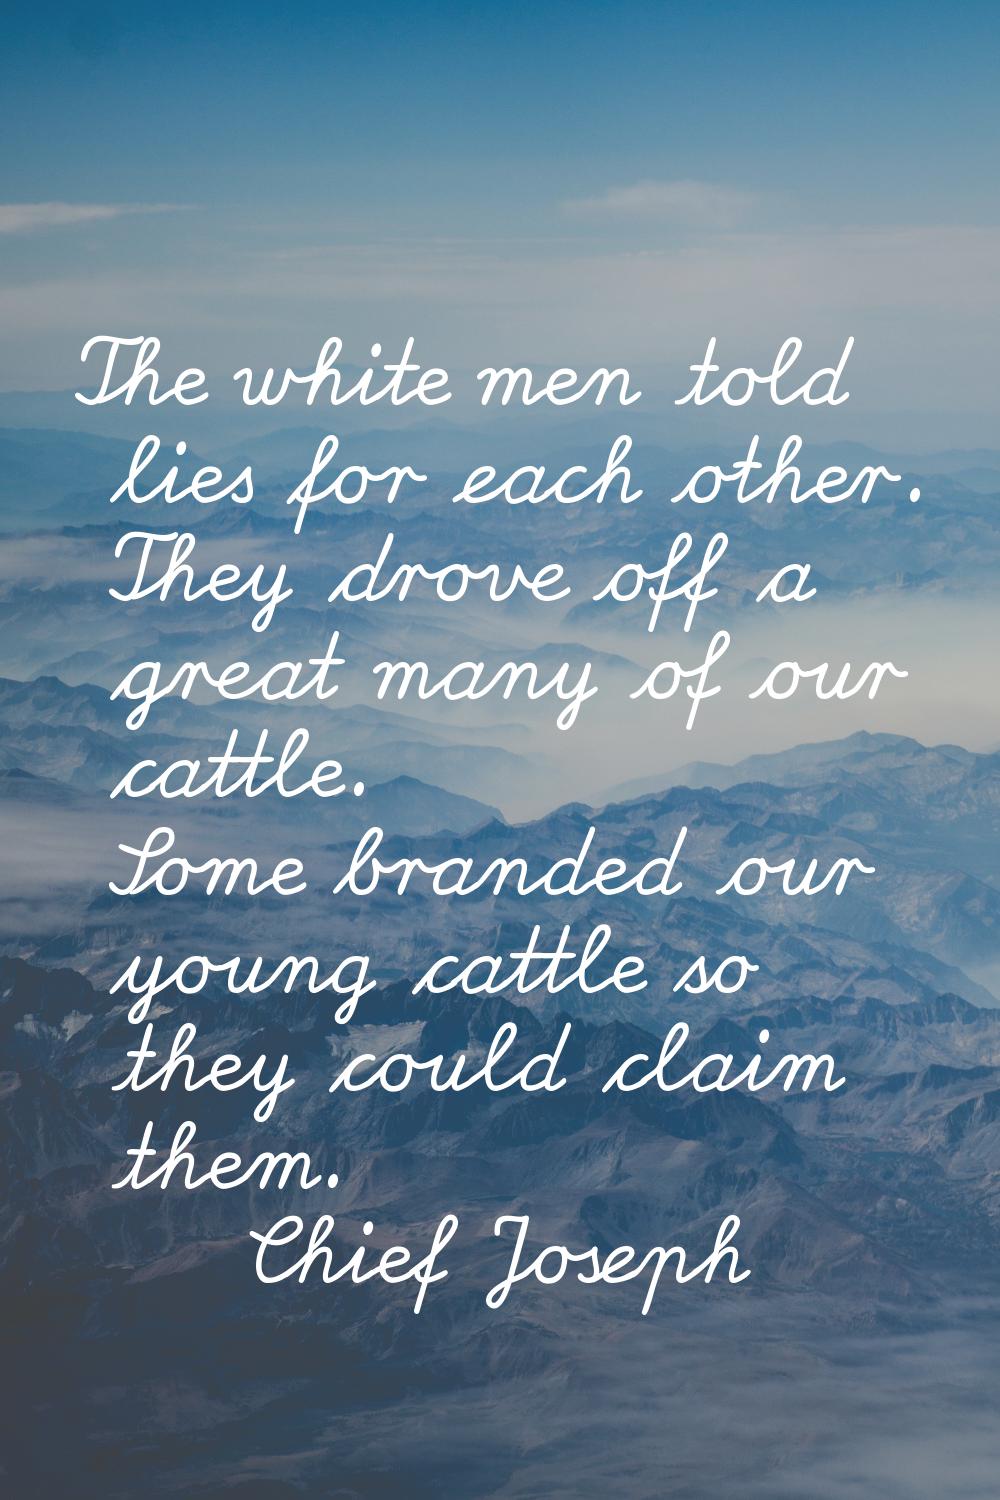 The white men told lies for each other. They drove off a great many of our cattle. Some branded our